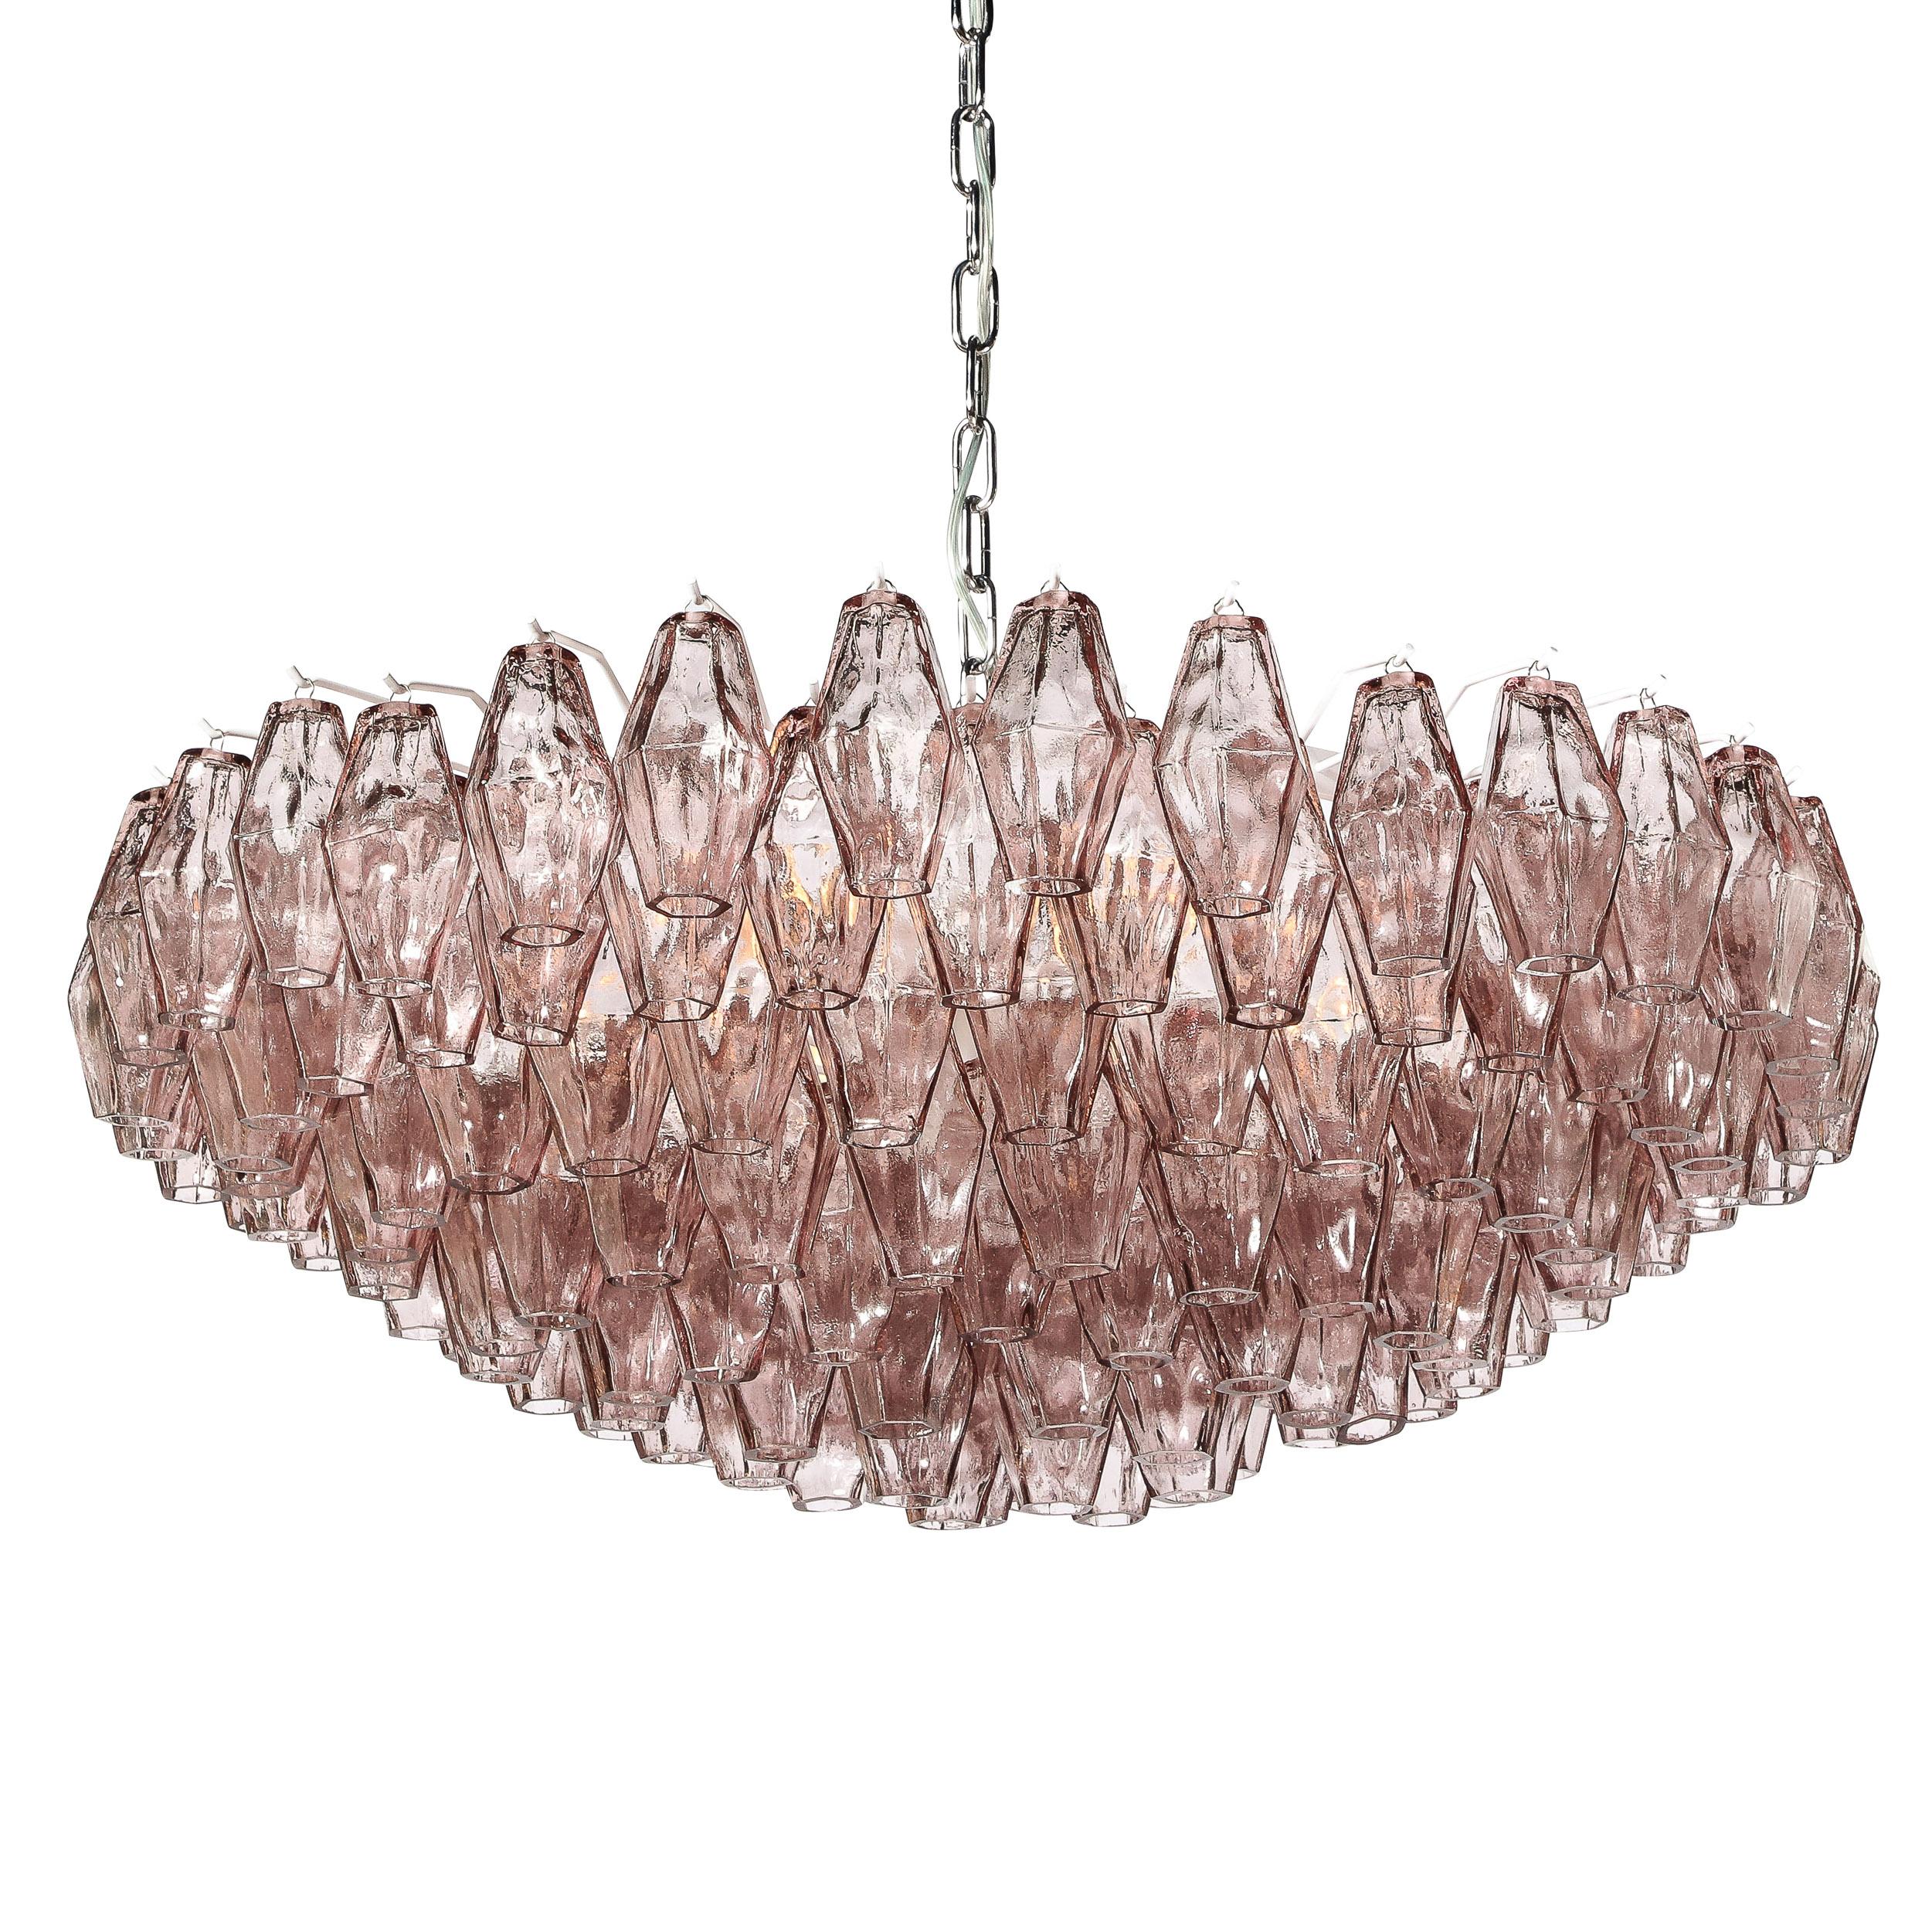 This beautiful Murano glass chandelier, in the manner of Venini, was hand blown in Murano, Italy- the island off the coast of Venice renowned for centuries for its superlative glass production. It features a constellation of handblown Murano glass